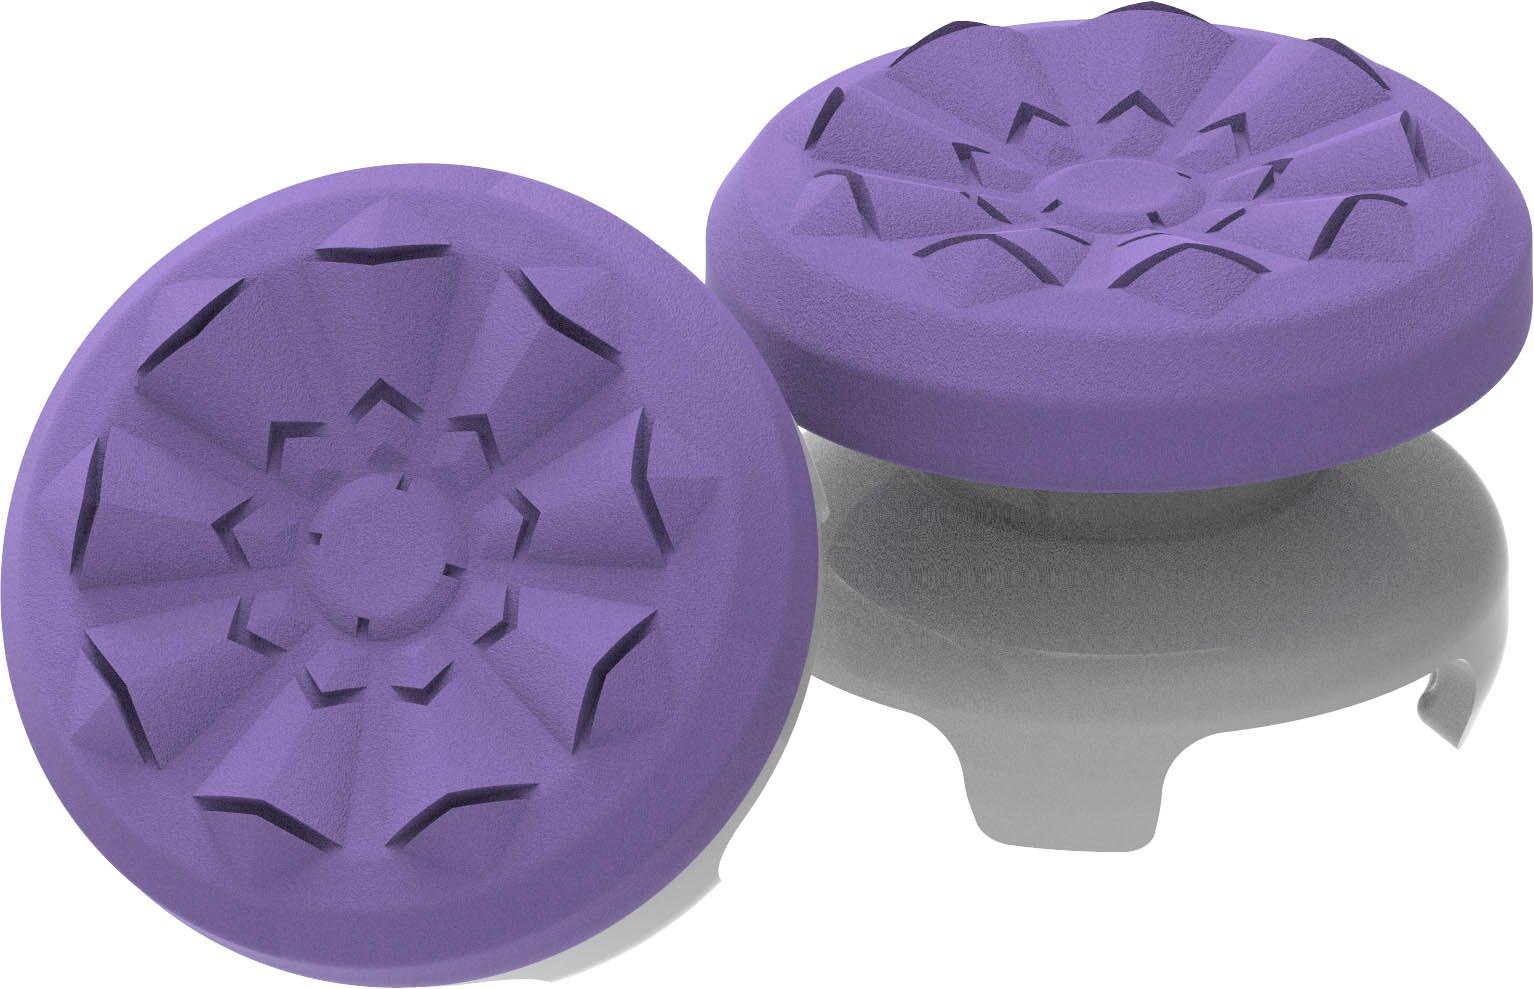 KontrolFreek FPS Freek Galaxy Performance Thumbsticks for Xbox Series X and Xbox One